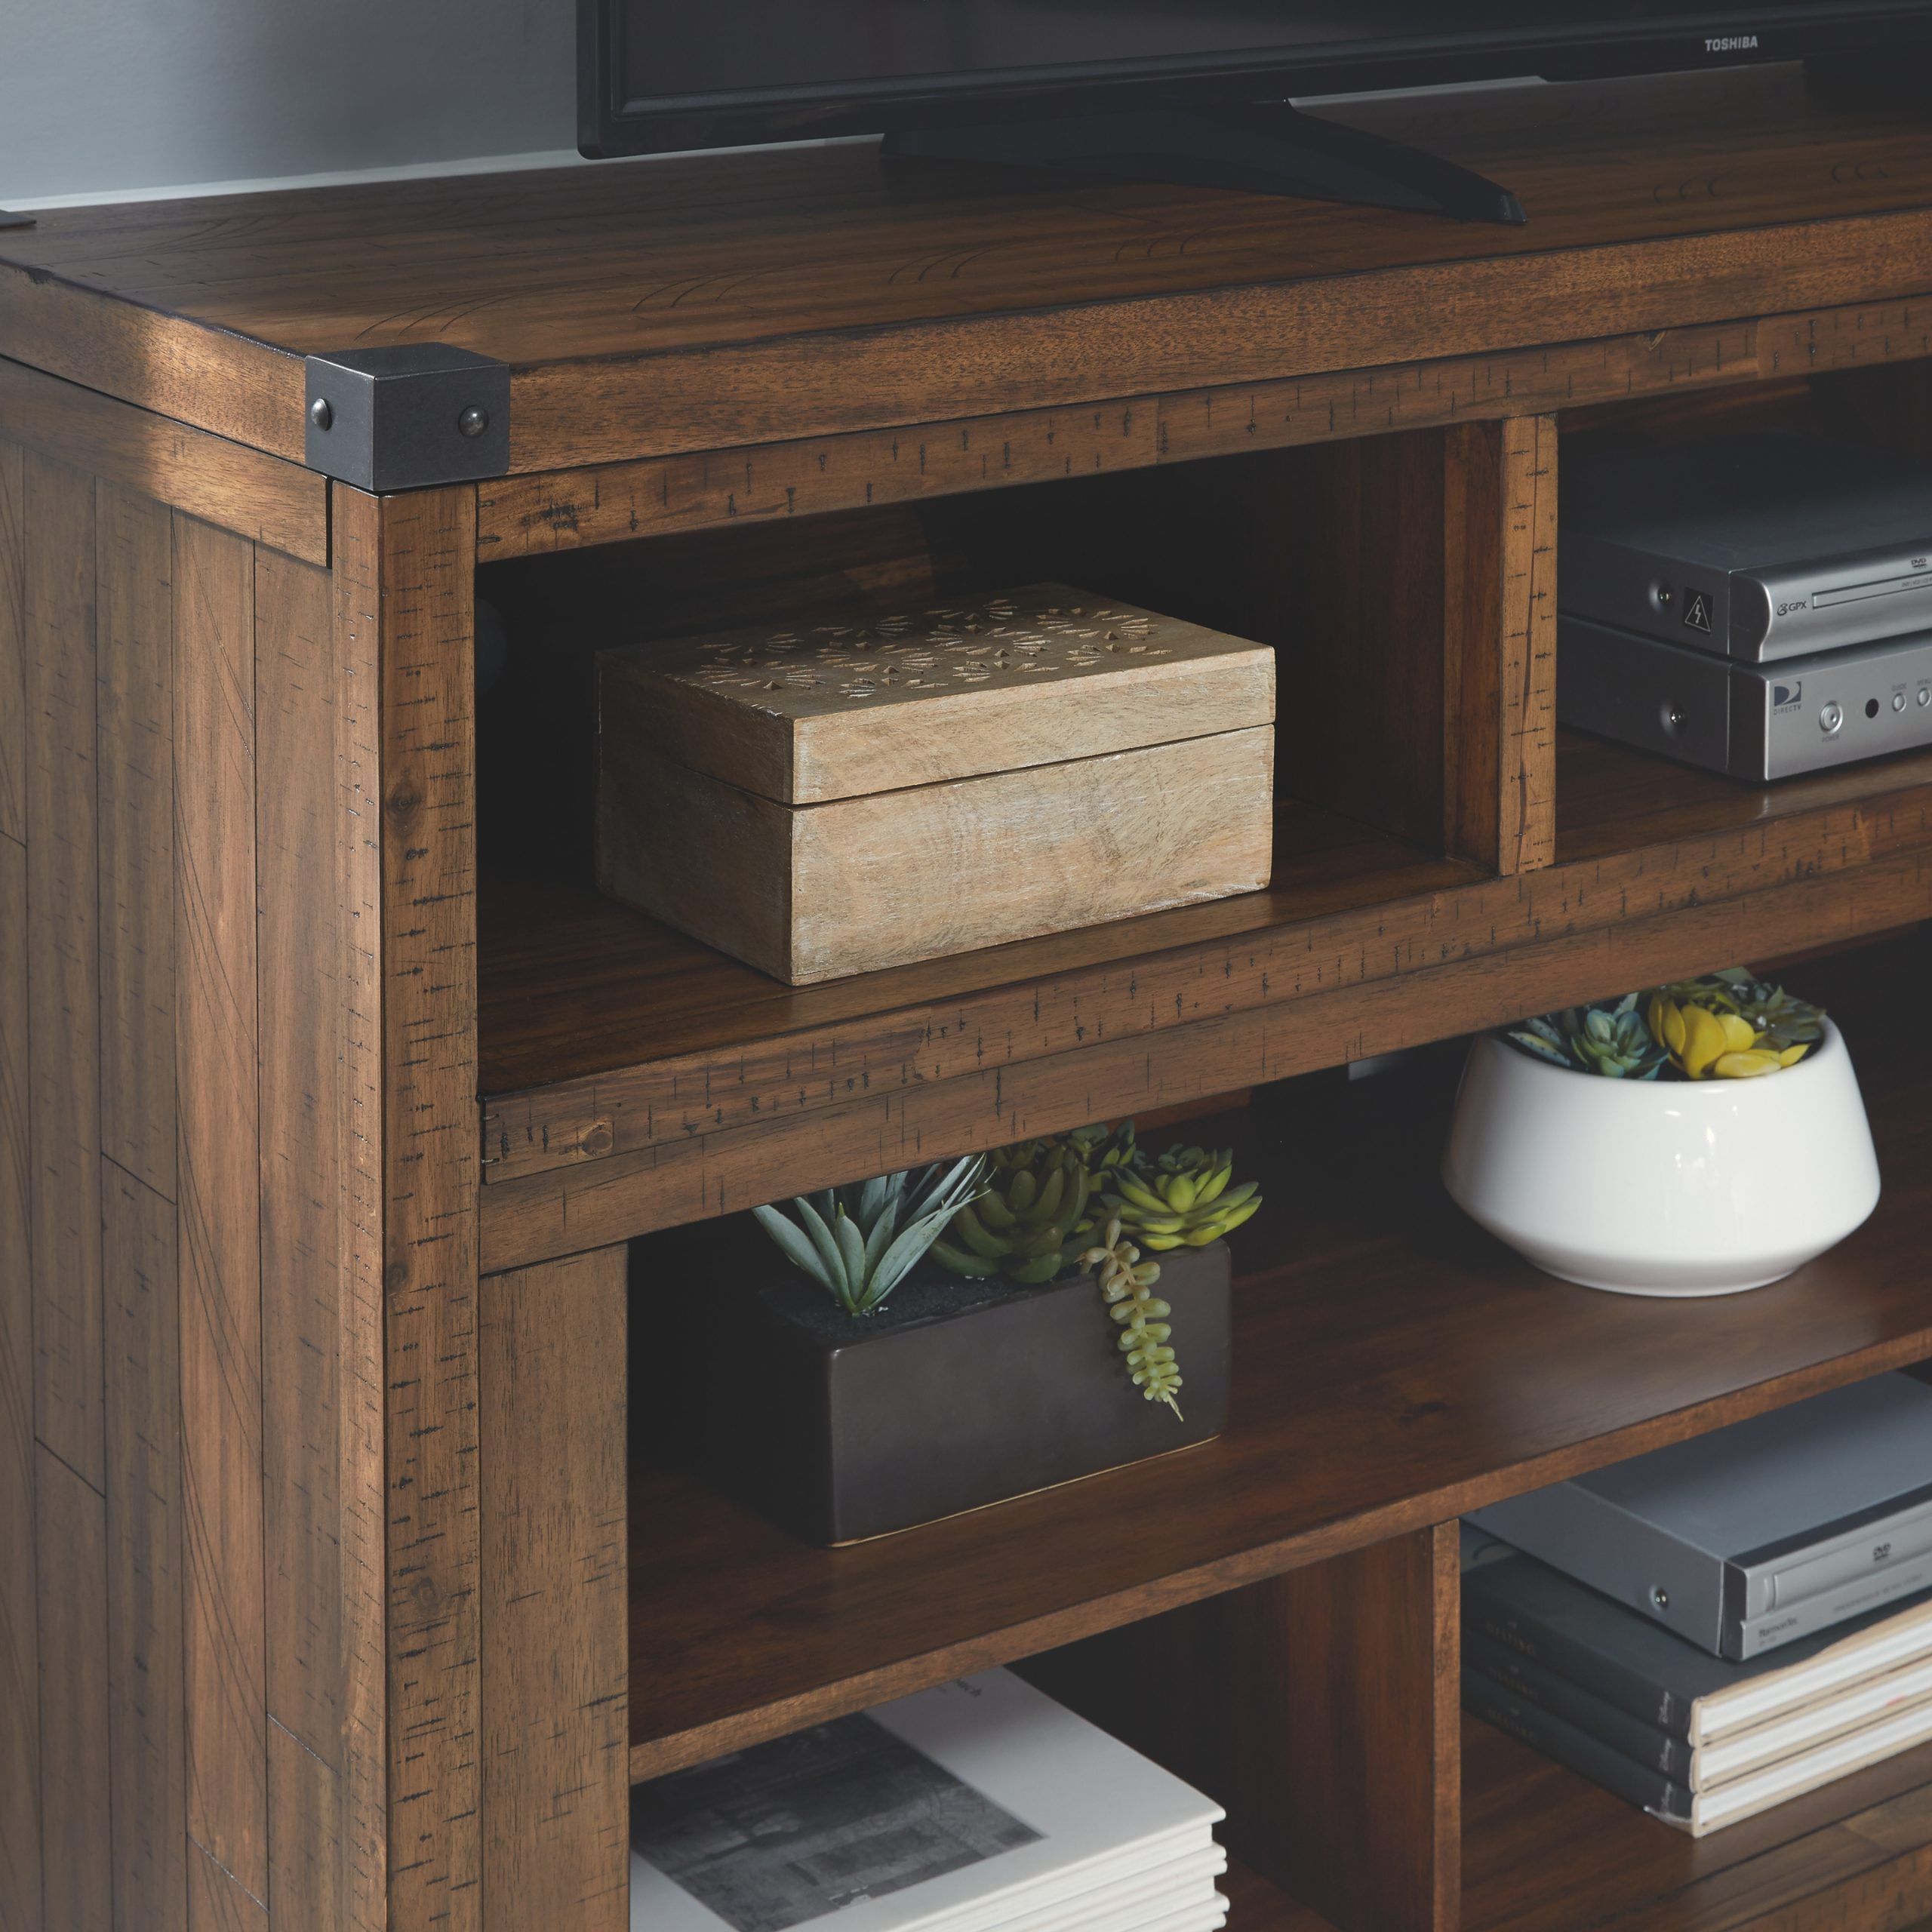 Royard 65" Tv Stand | Furnitureland Intended For Metin Tv Stands For Tvs Up To 65" (View 14 of 15)